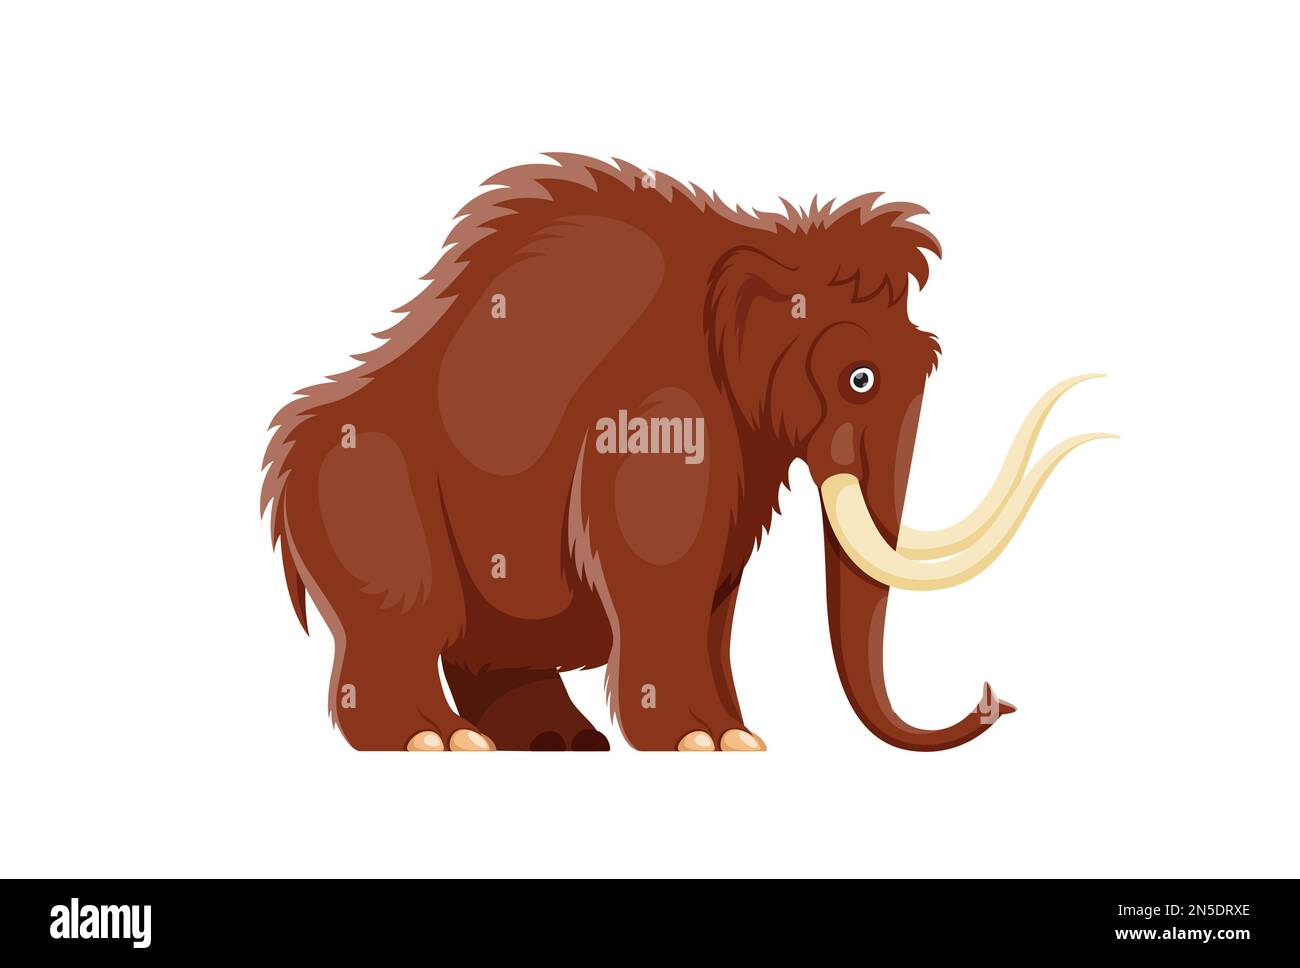 Cartoon Mammoth Animal Character Ice Age Mammal With Tusks And Trunk